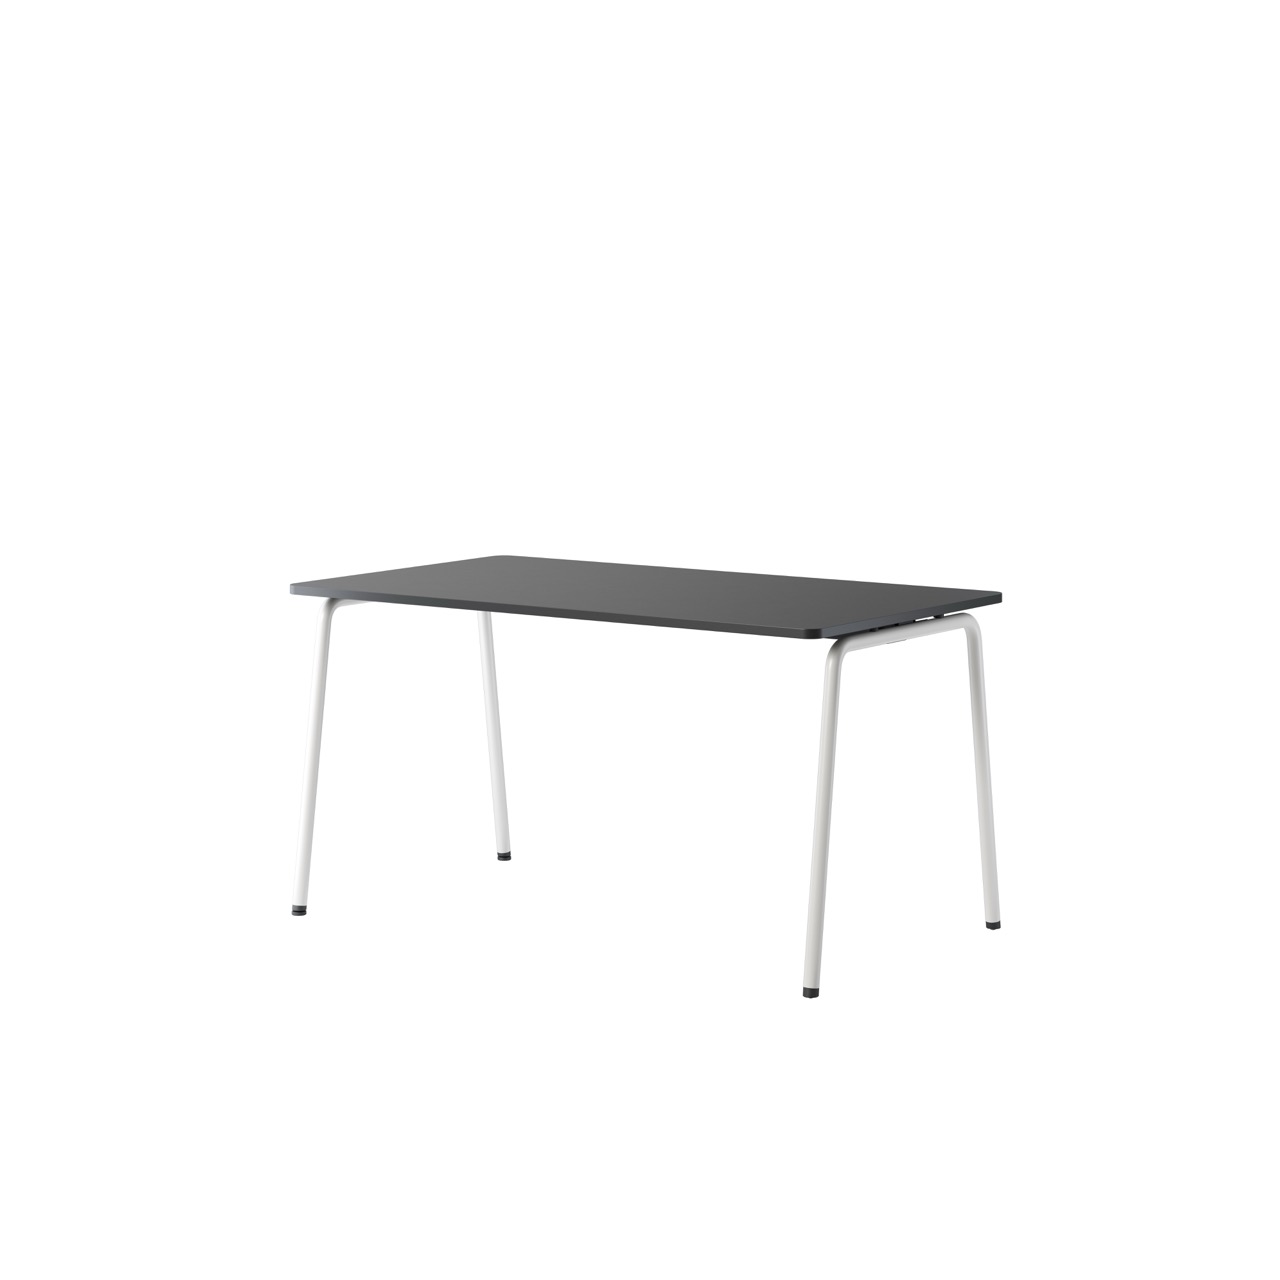 OCEE&FOUR - Tables - FourReal 74 - 140 x 80 - Angled - Packshot Image 2 Large